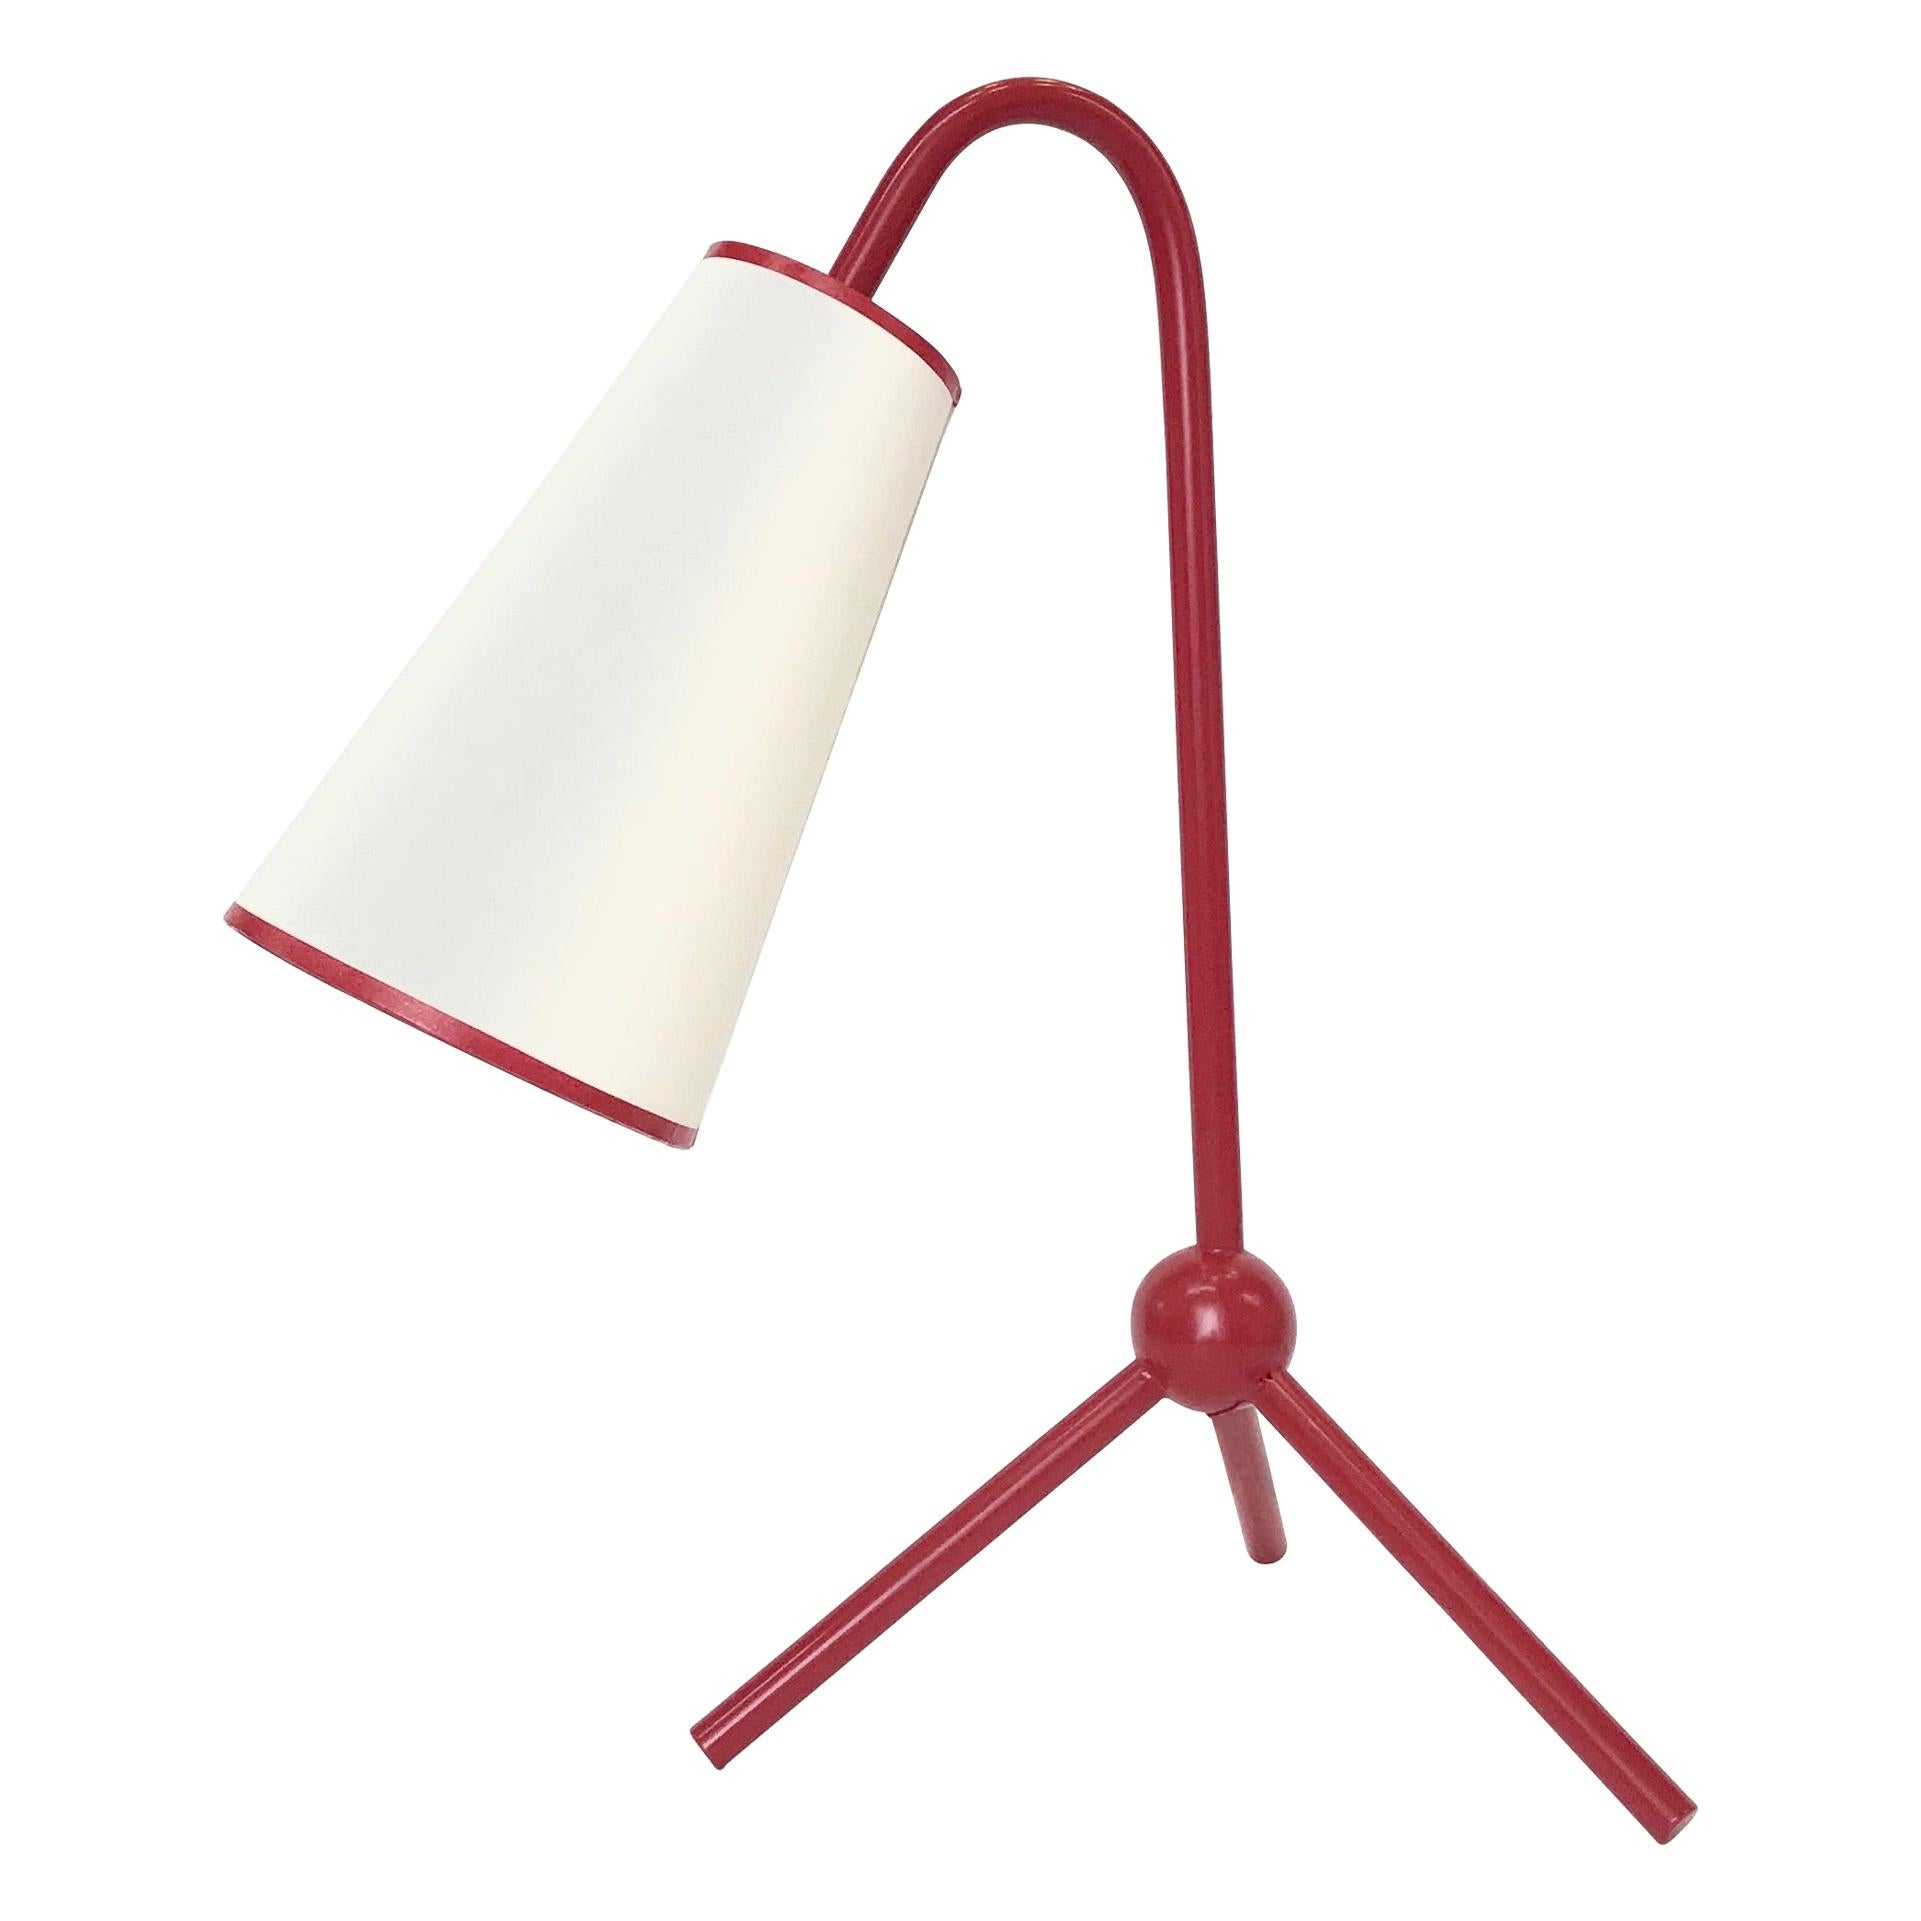 Jean Royère Style "1955" Table Lamp in Red